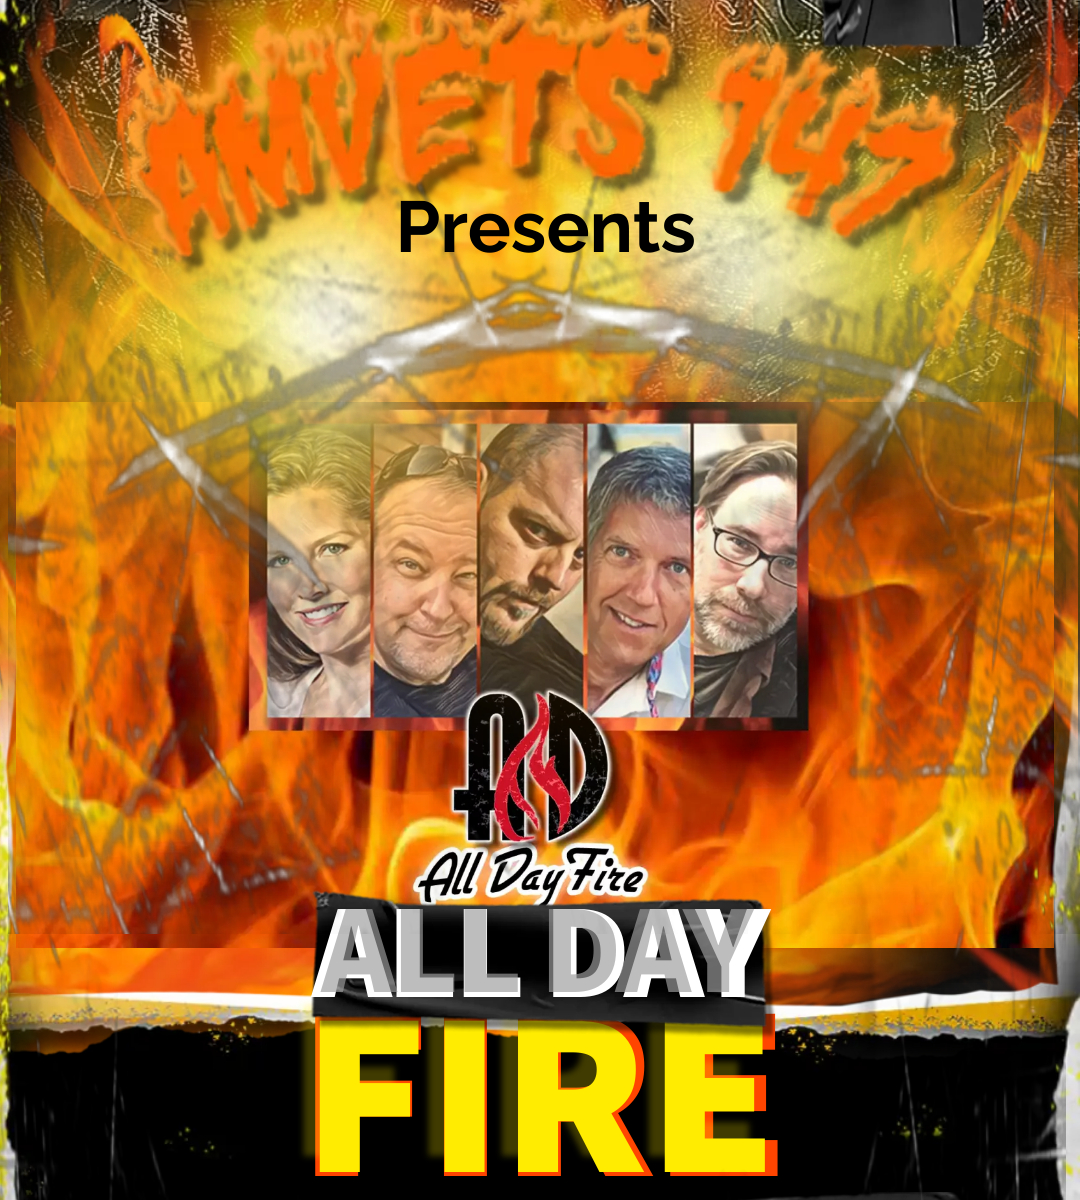 All Day Fire Live band at AmVets Post 147 in Haverhill Massachusetts